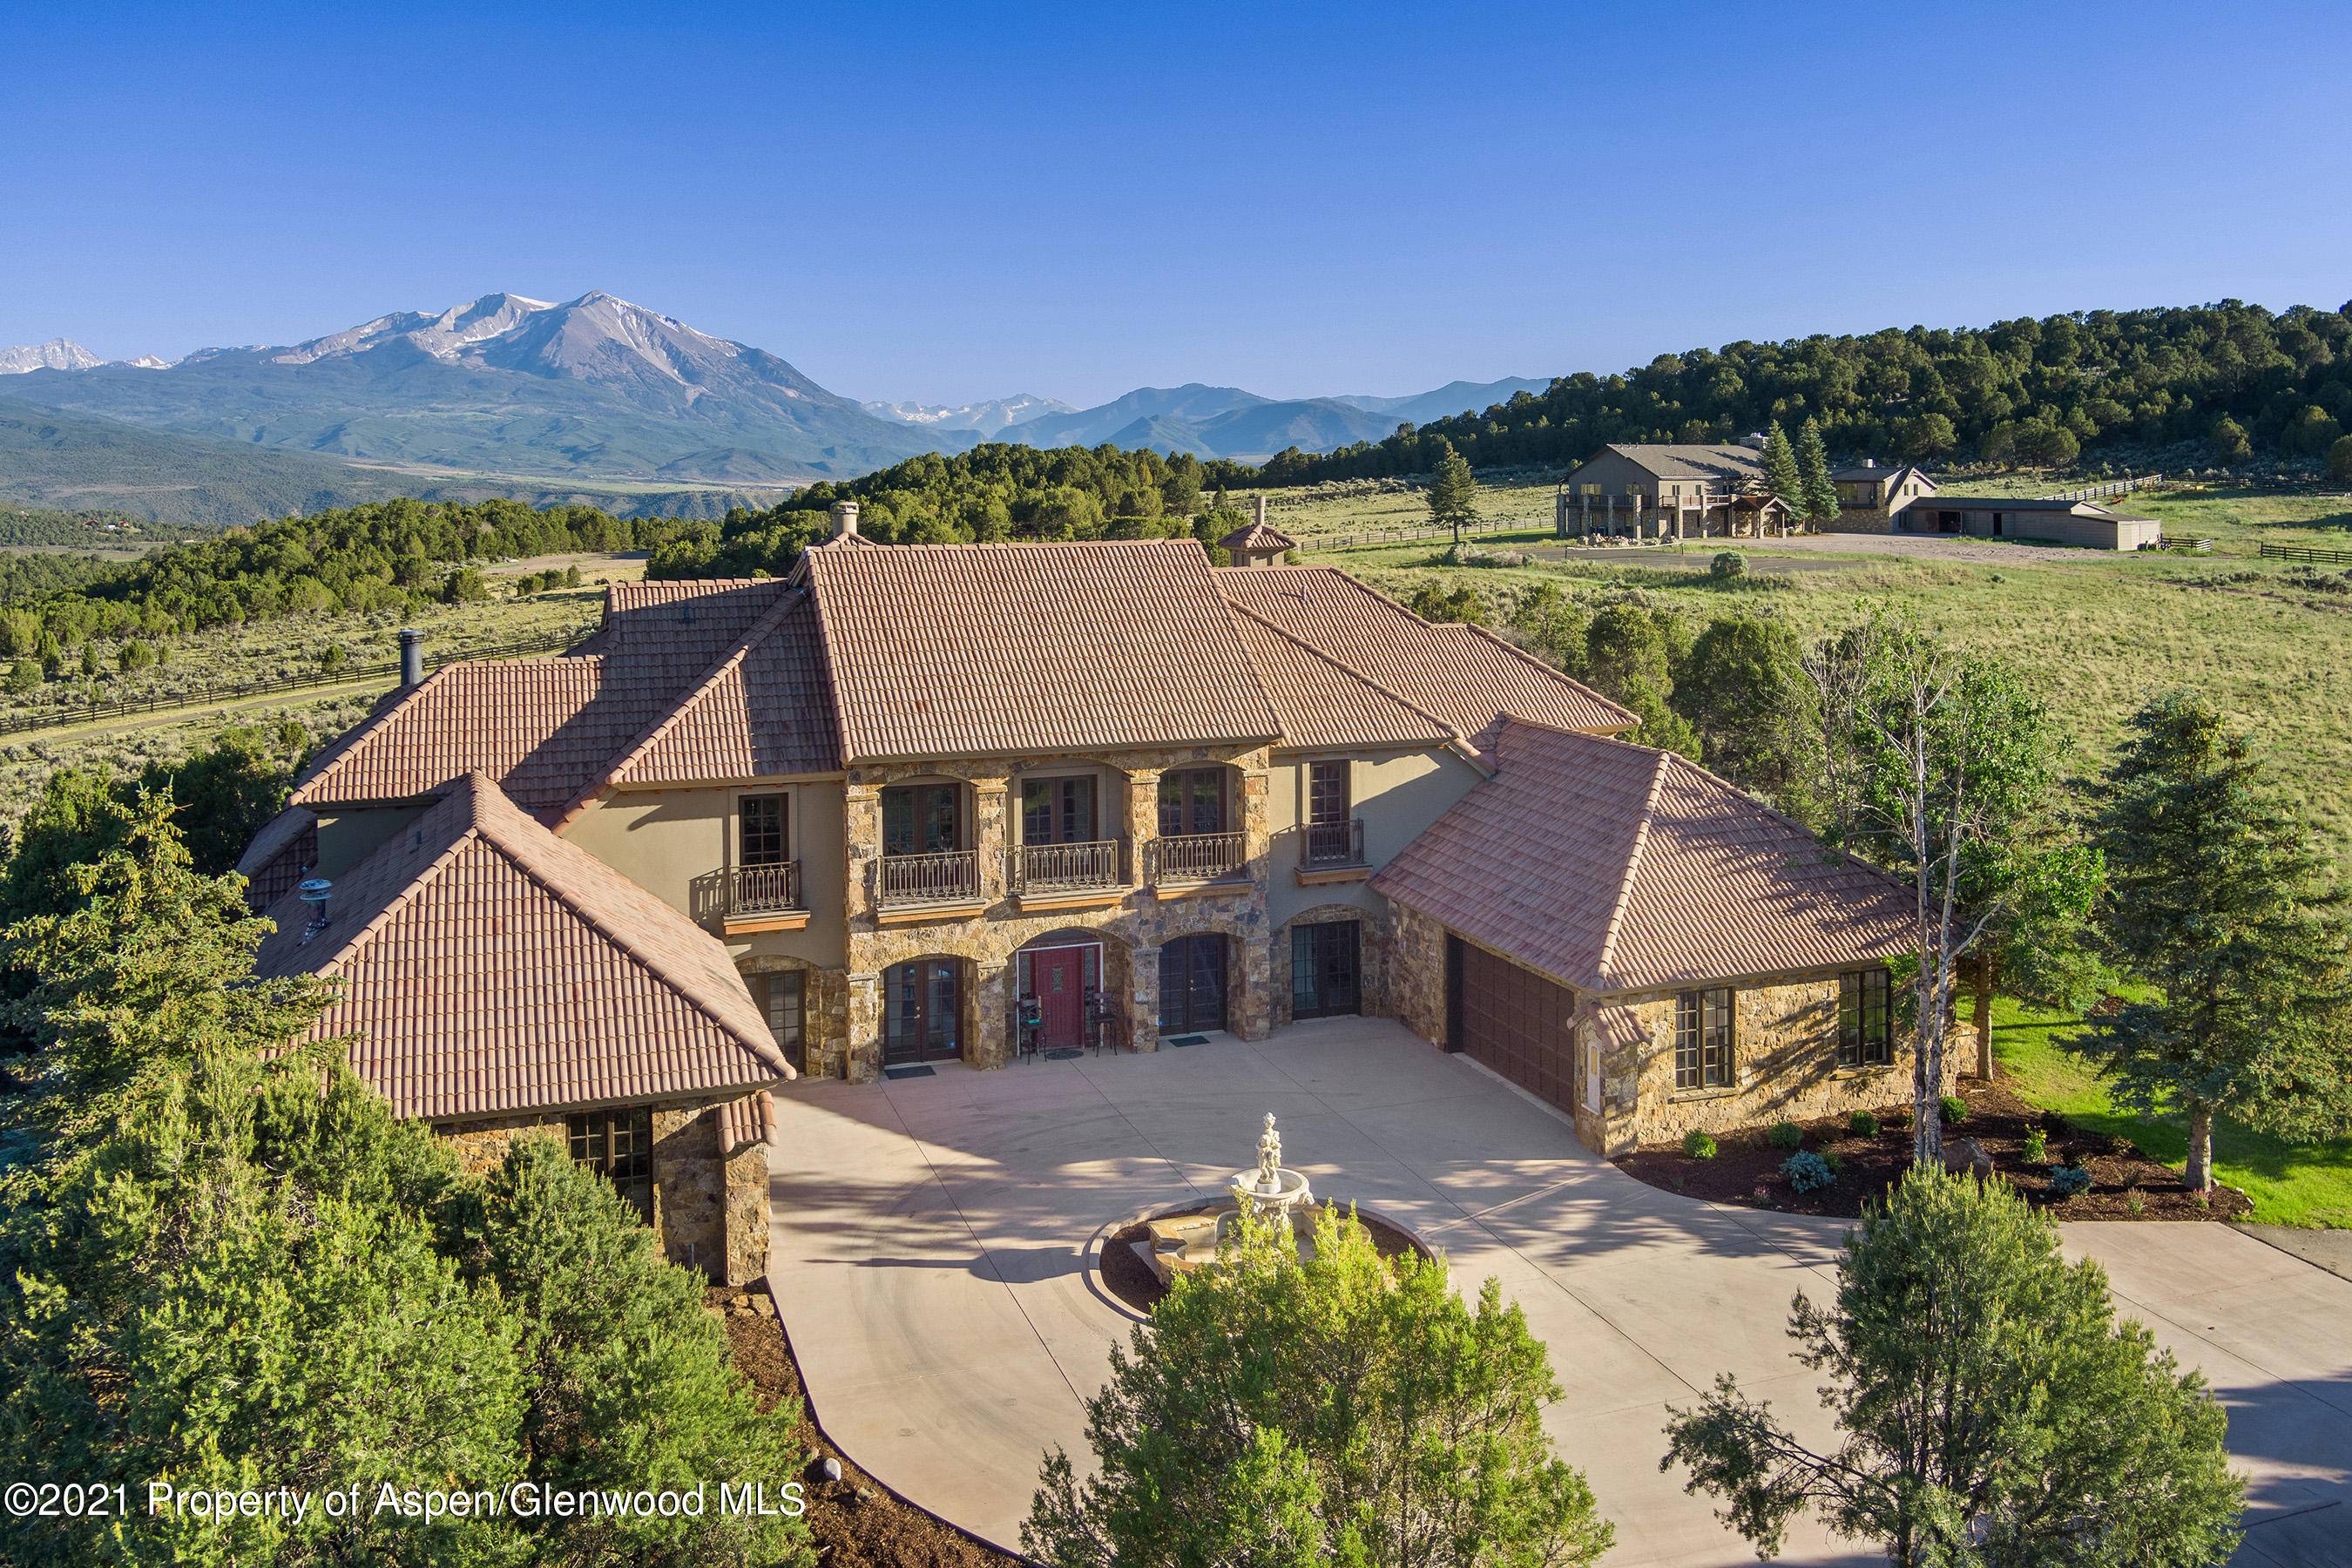 Acreage has long been an aspiration of property buyers throughout America's storied history.